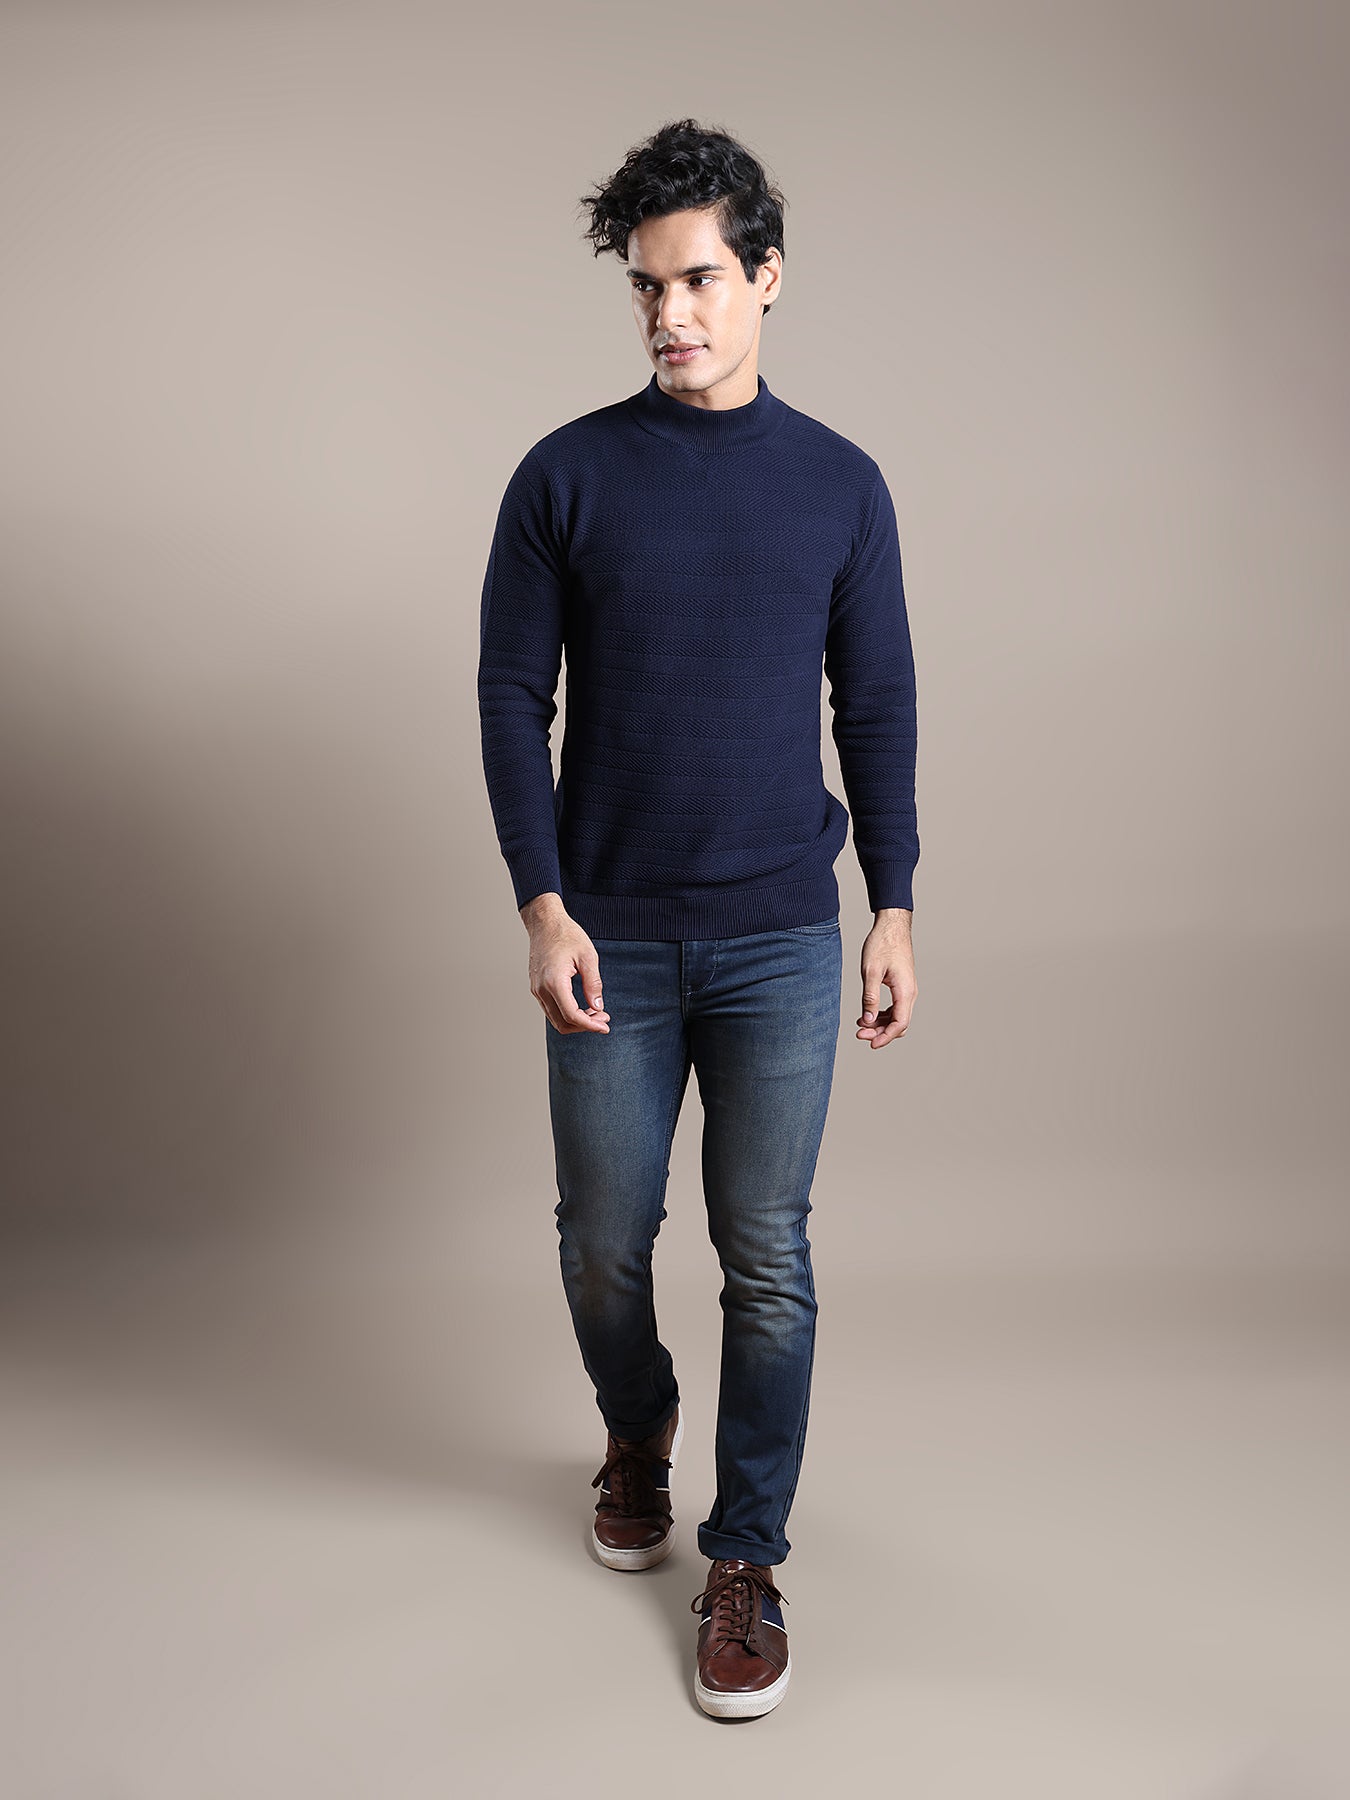 Knitted Navy Blue Plain Regular Fit Full Sleeve Casual Pullover